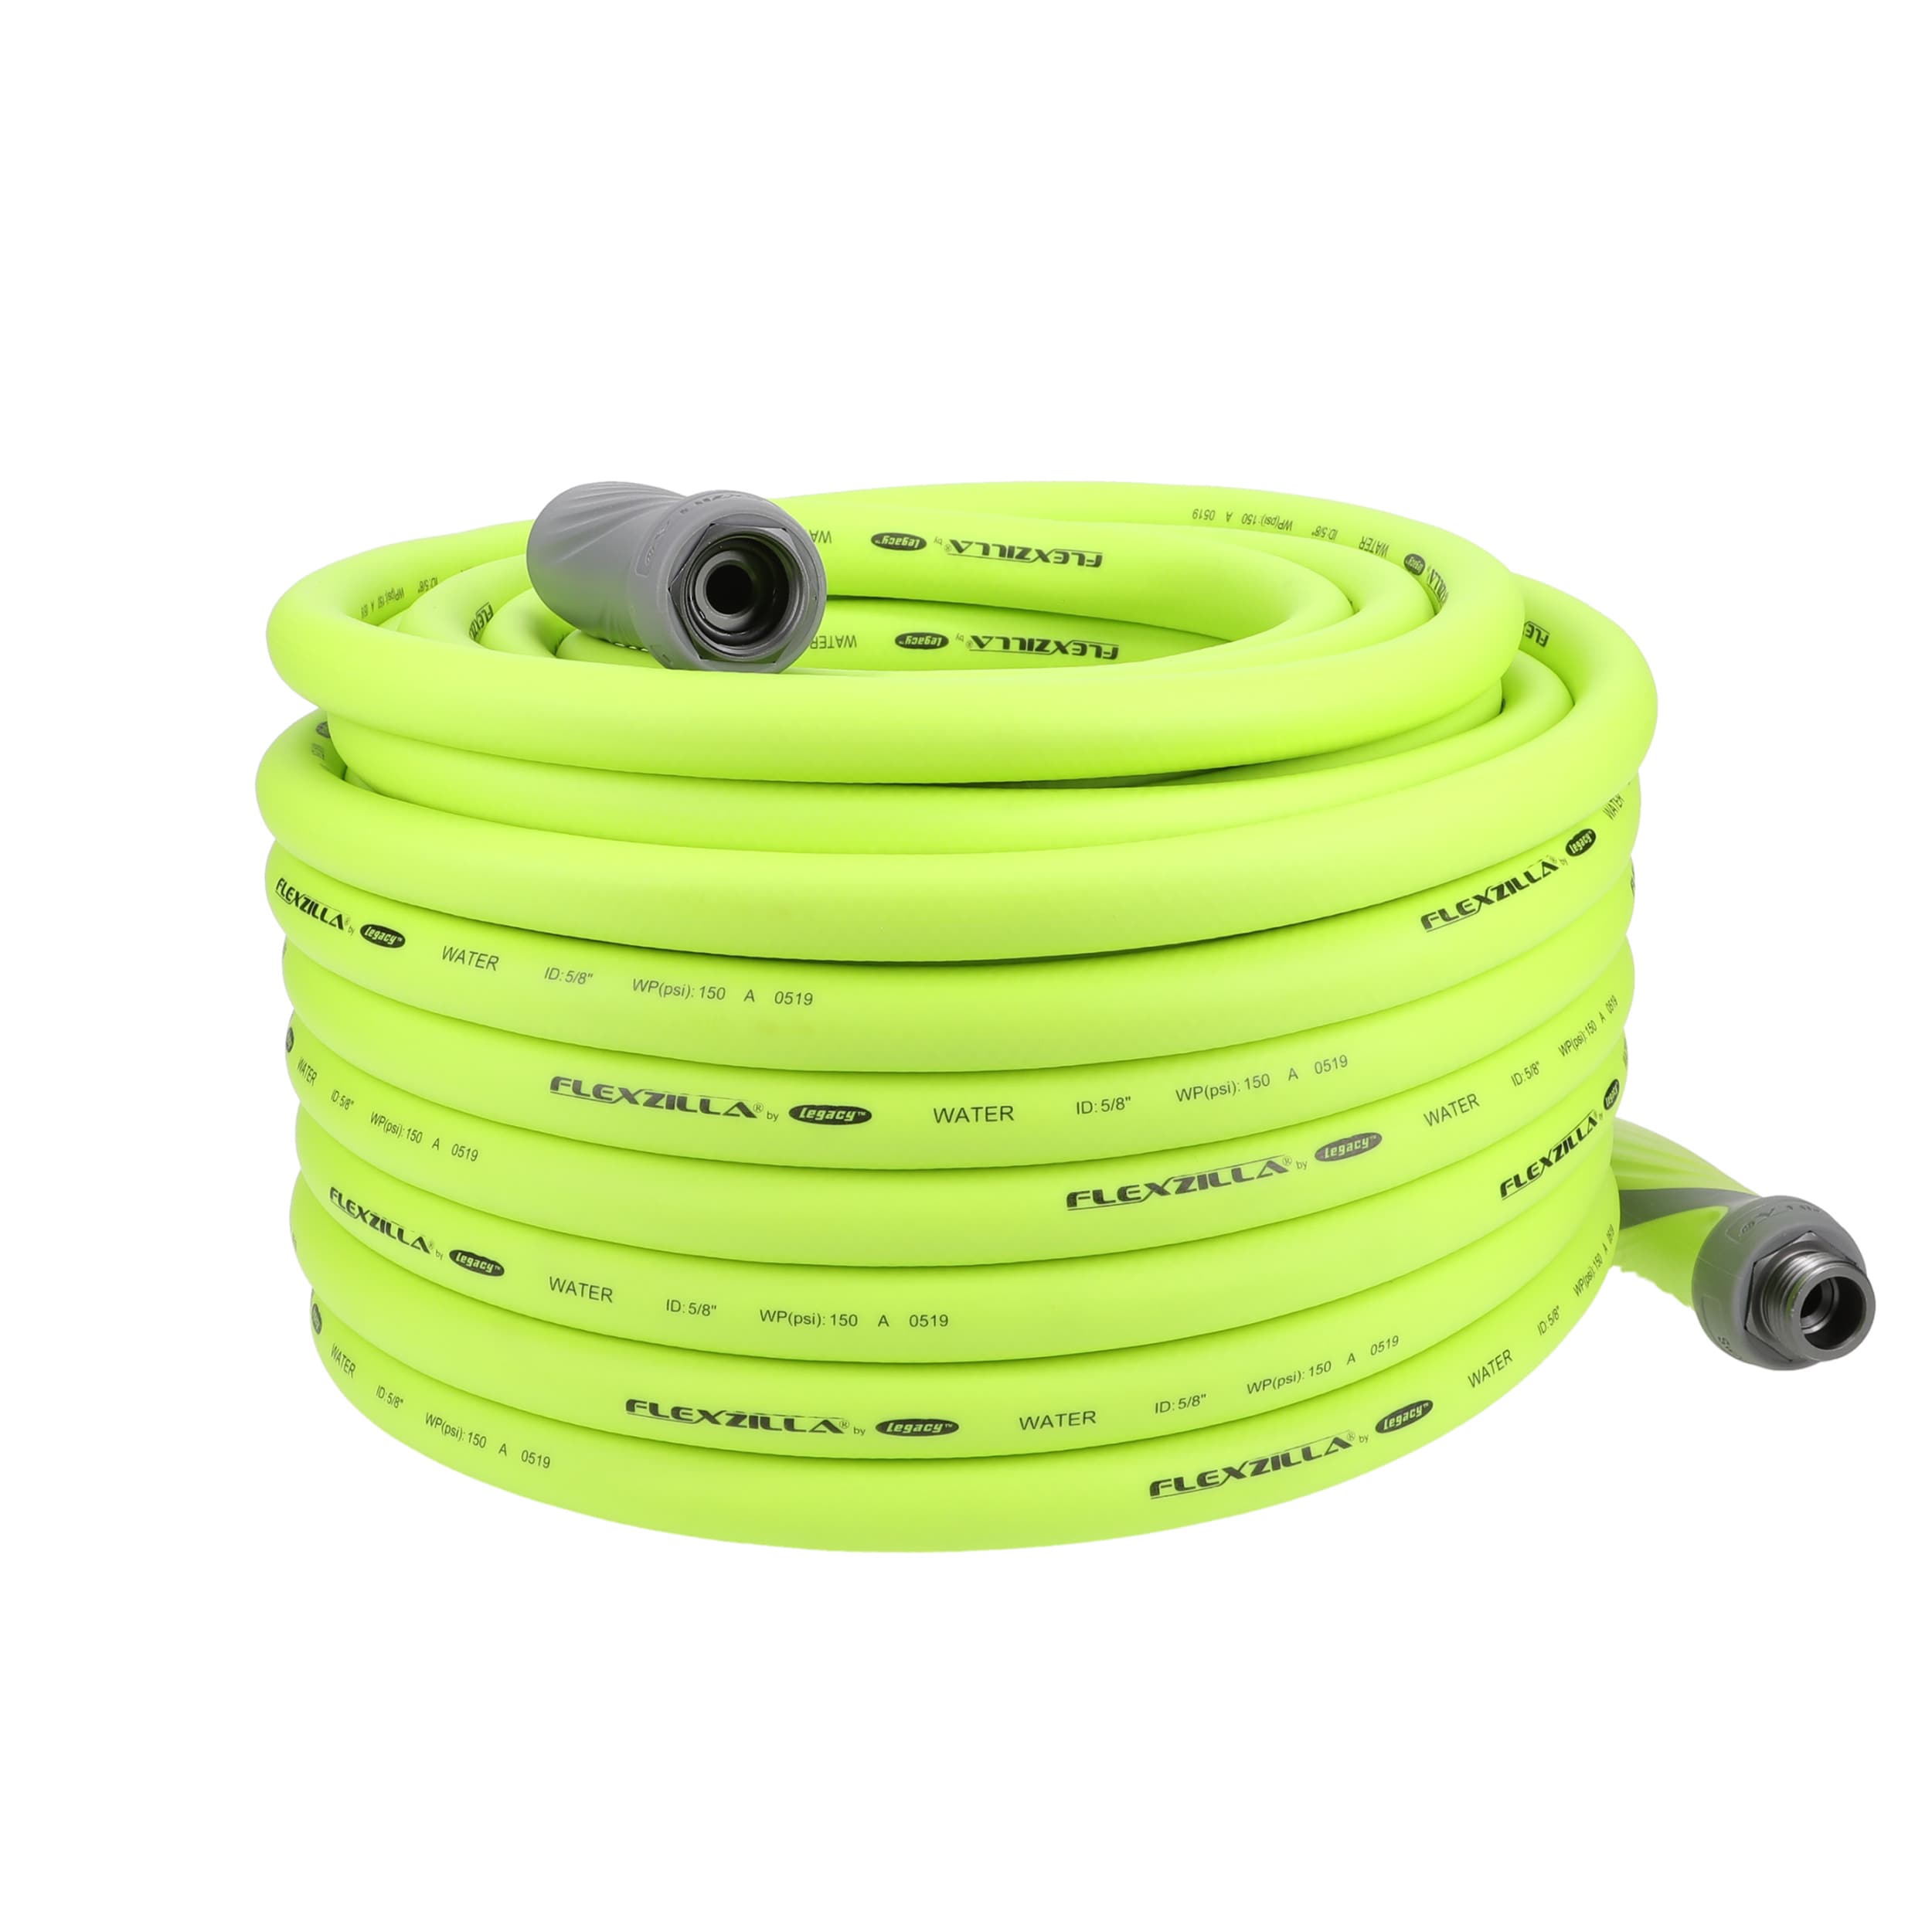 Garden Hose With SwivelGrip X 100 Ft Green for sale online Flexzilla HFZG5100YWS 5/8 In 